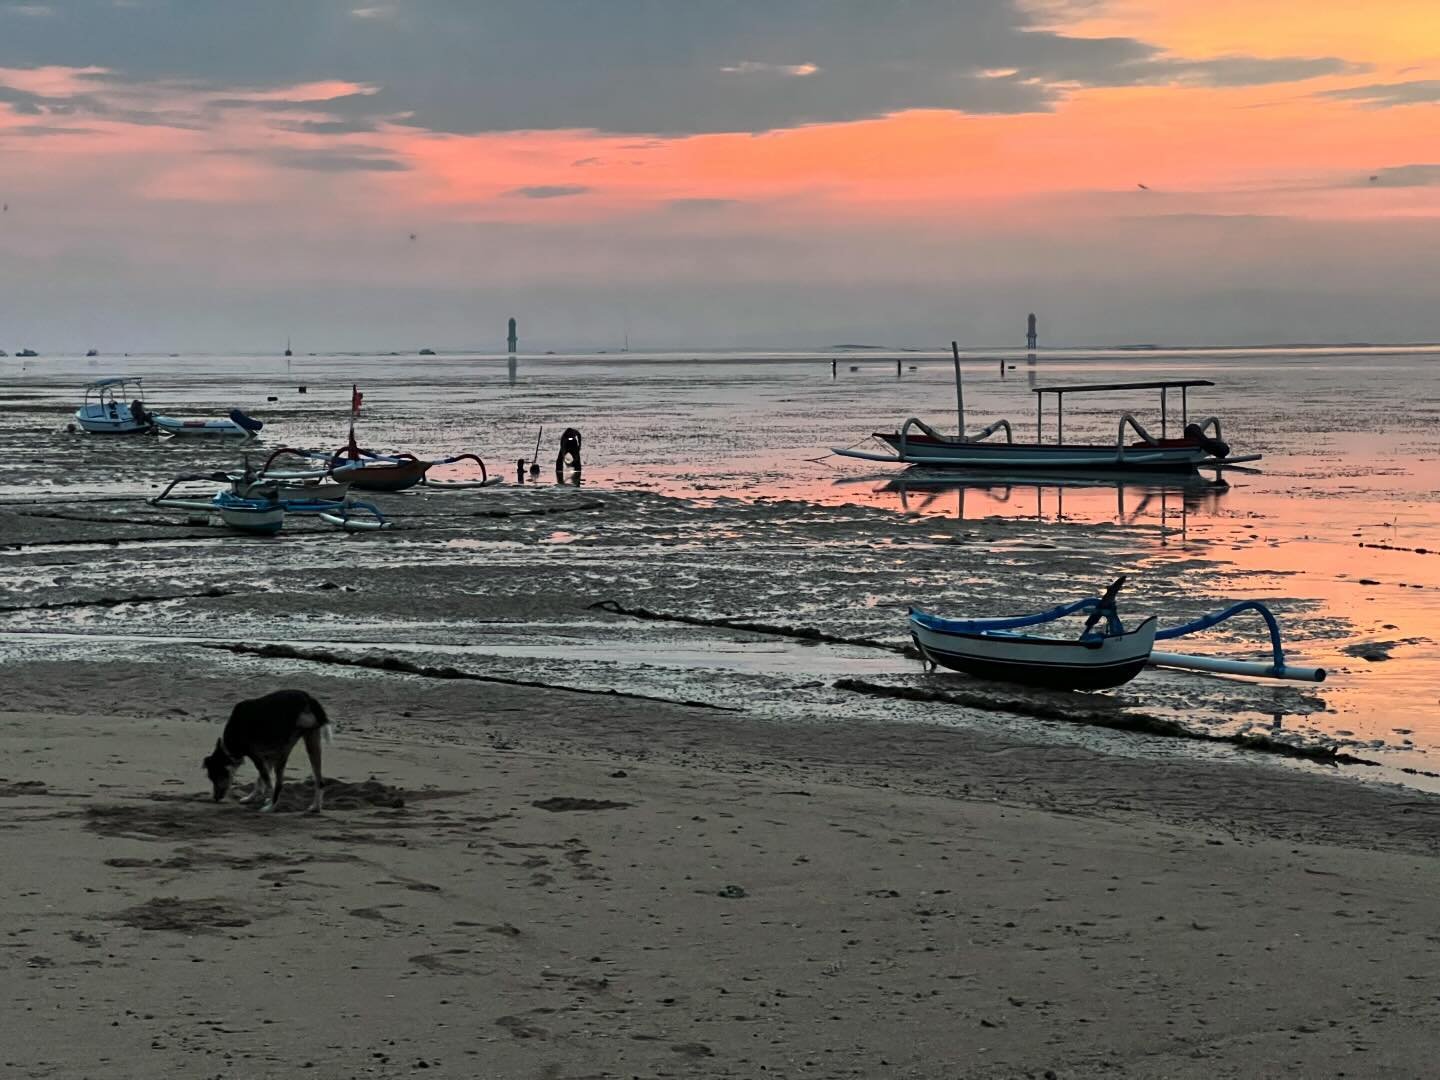 If you&rsquo;ve never done it before, Sanur has one of Bali&rsquo;s best sunrises, a fiery pink ball that kisses the beach purple &amp; orange &amp; makes silhouettes of wooden reef boats and roaming dogs.

Best viewing locale is from Pantai Bopel ne